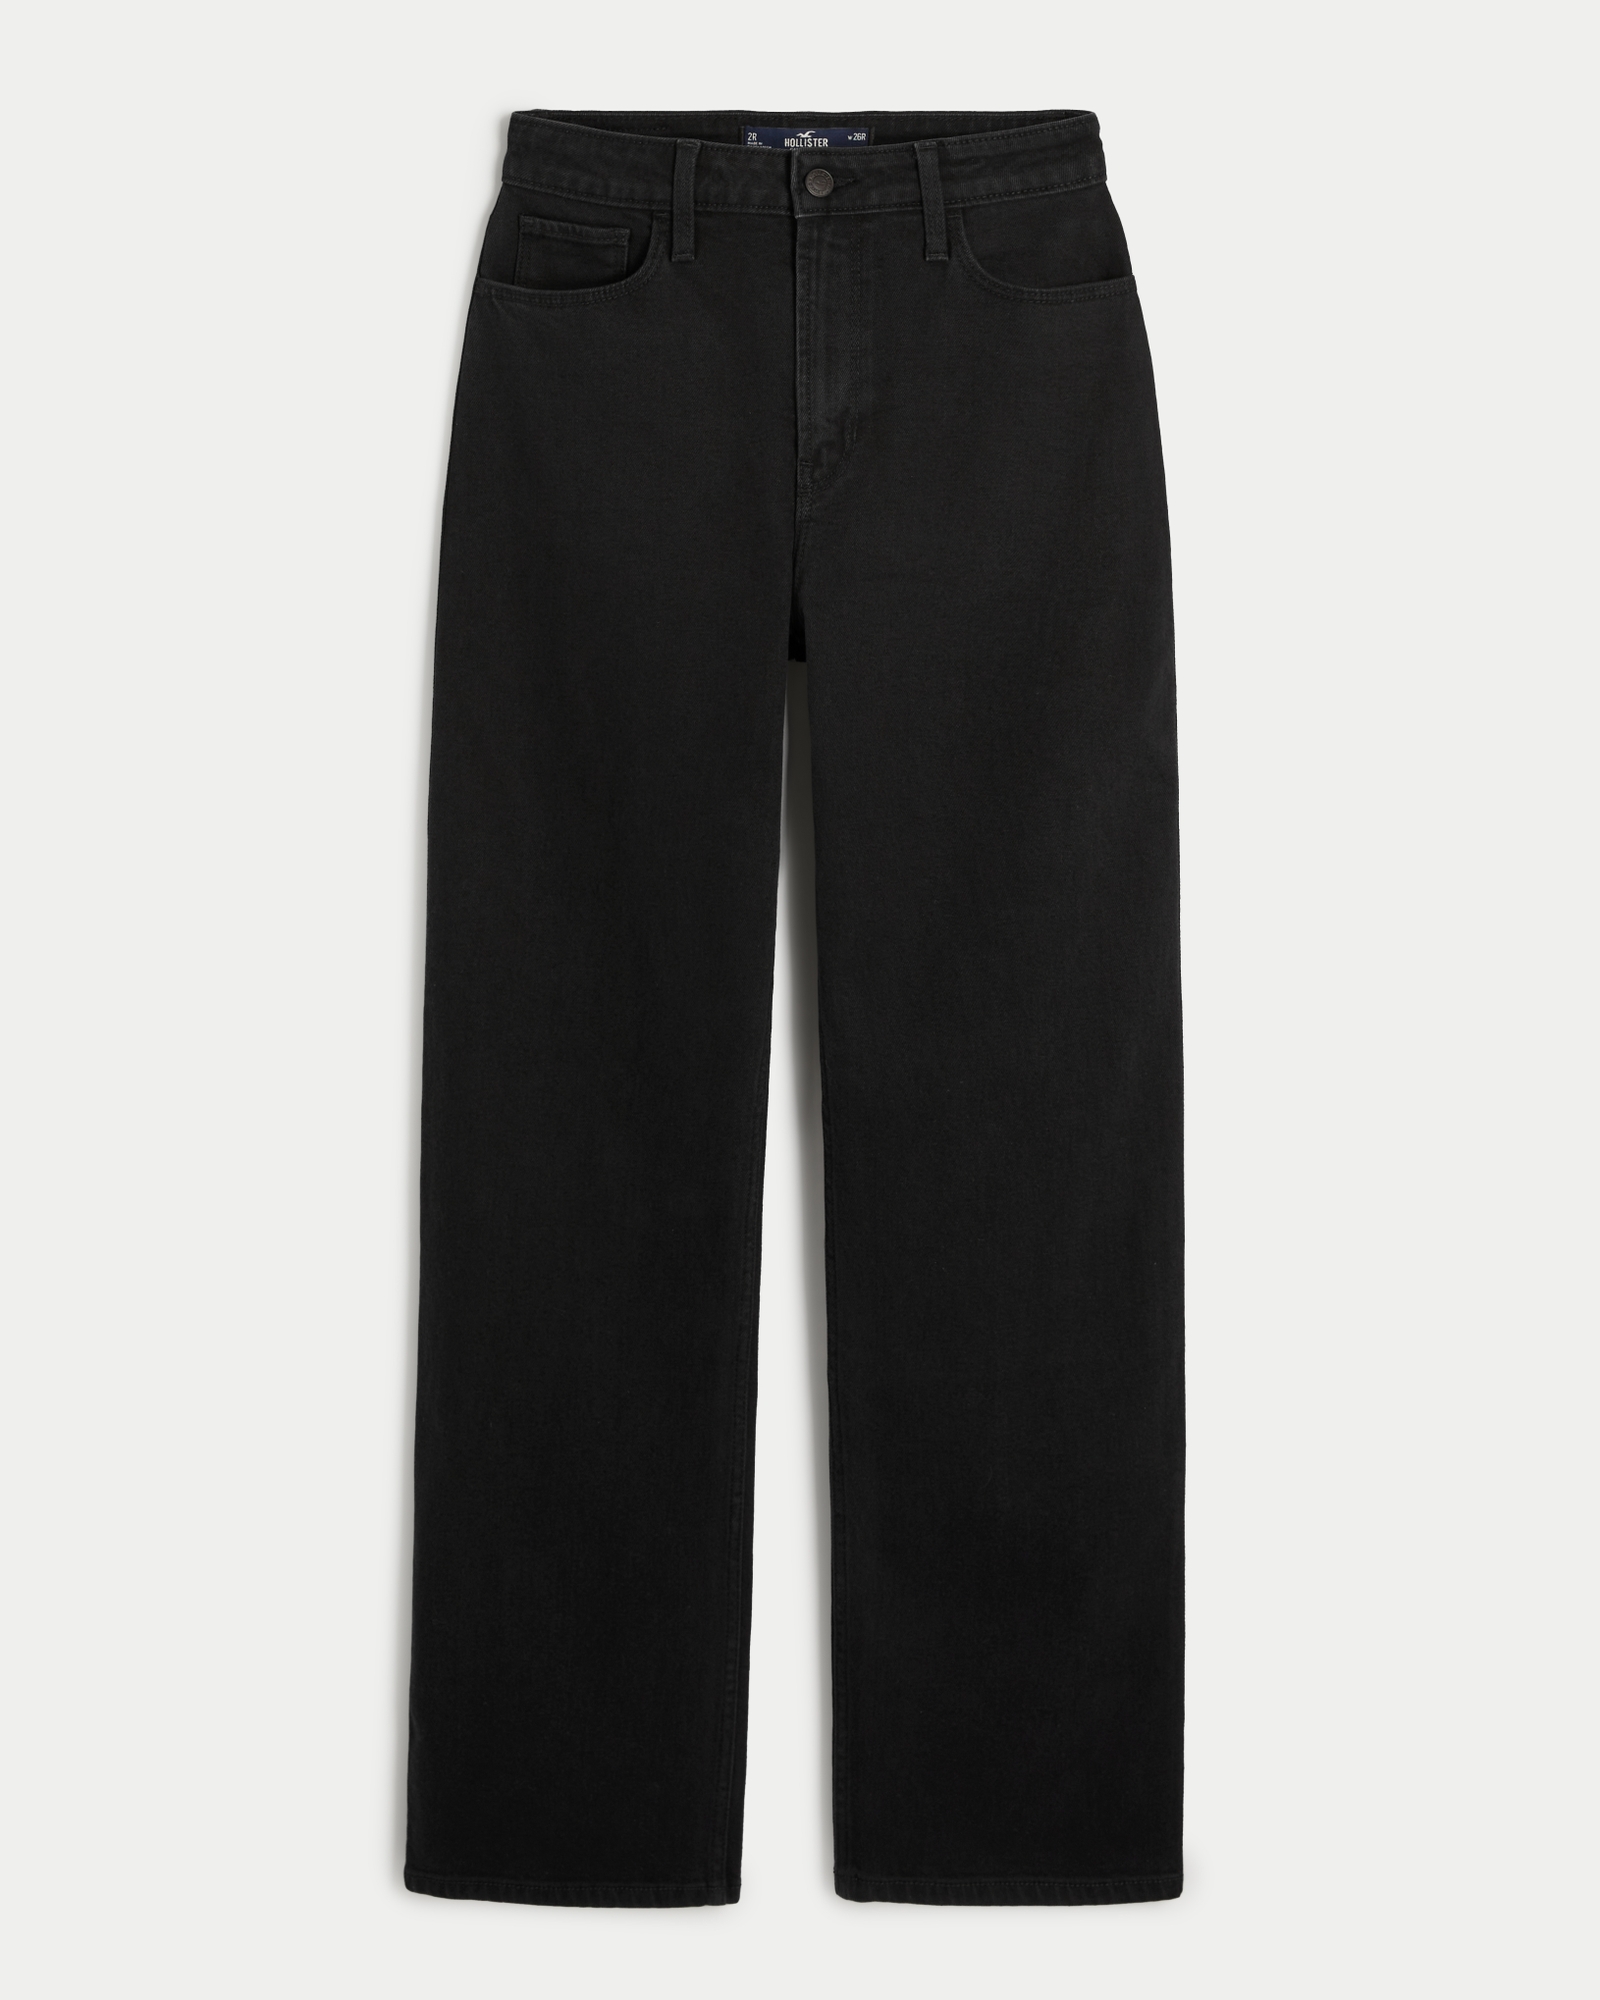 Hollister faux leather dad pants in black